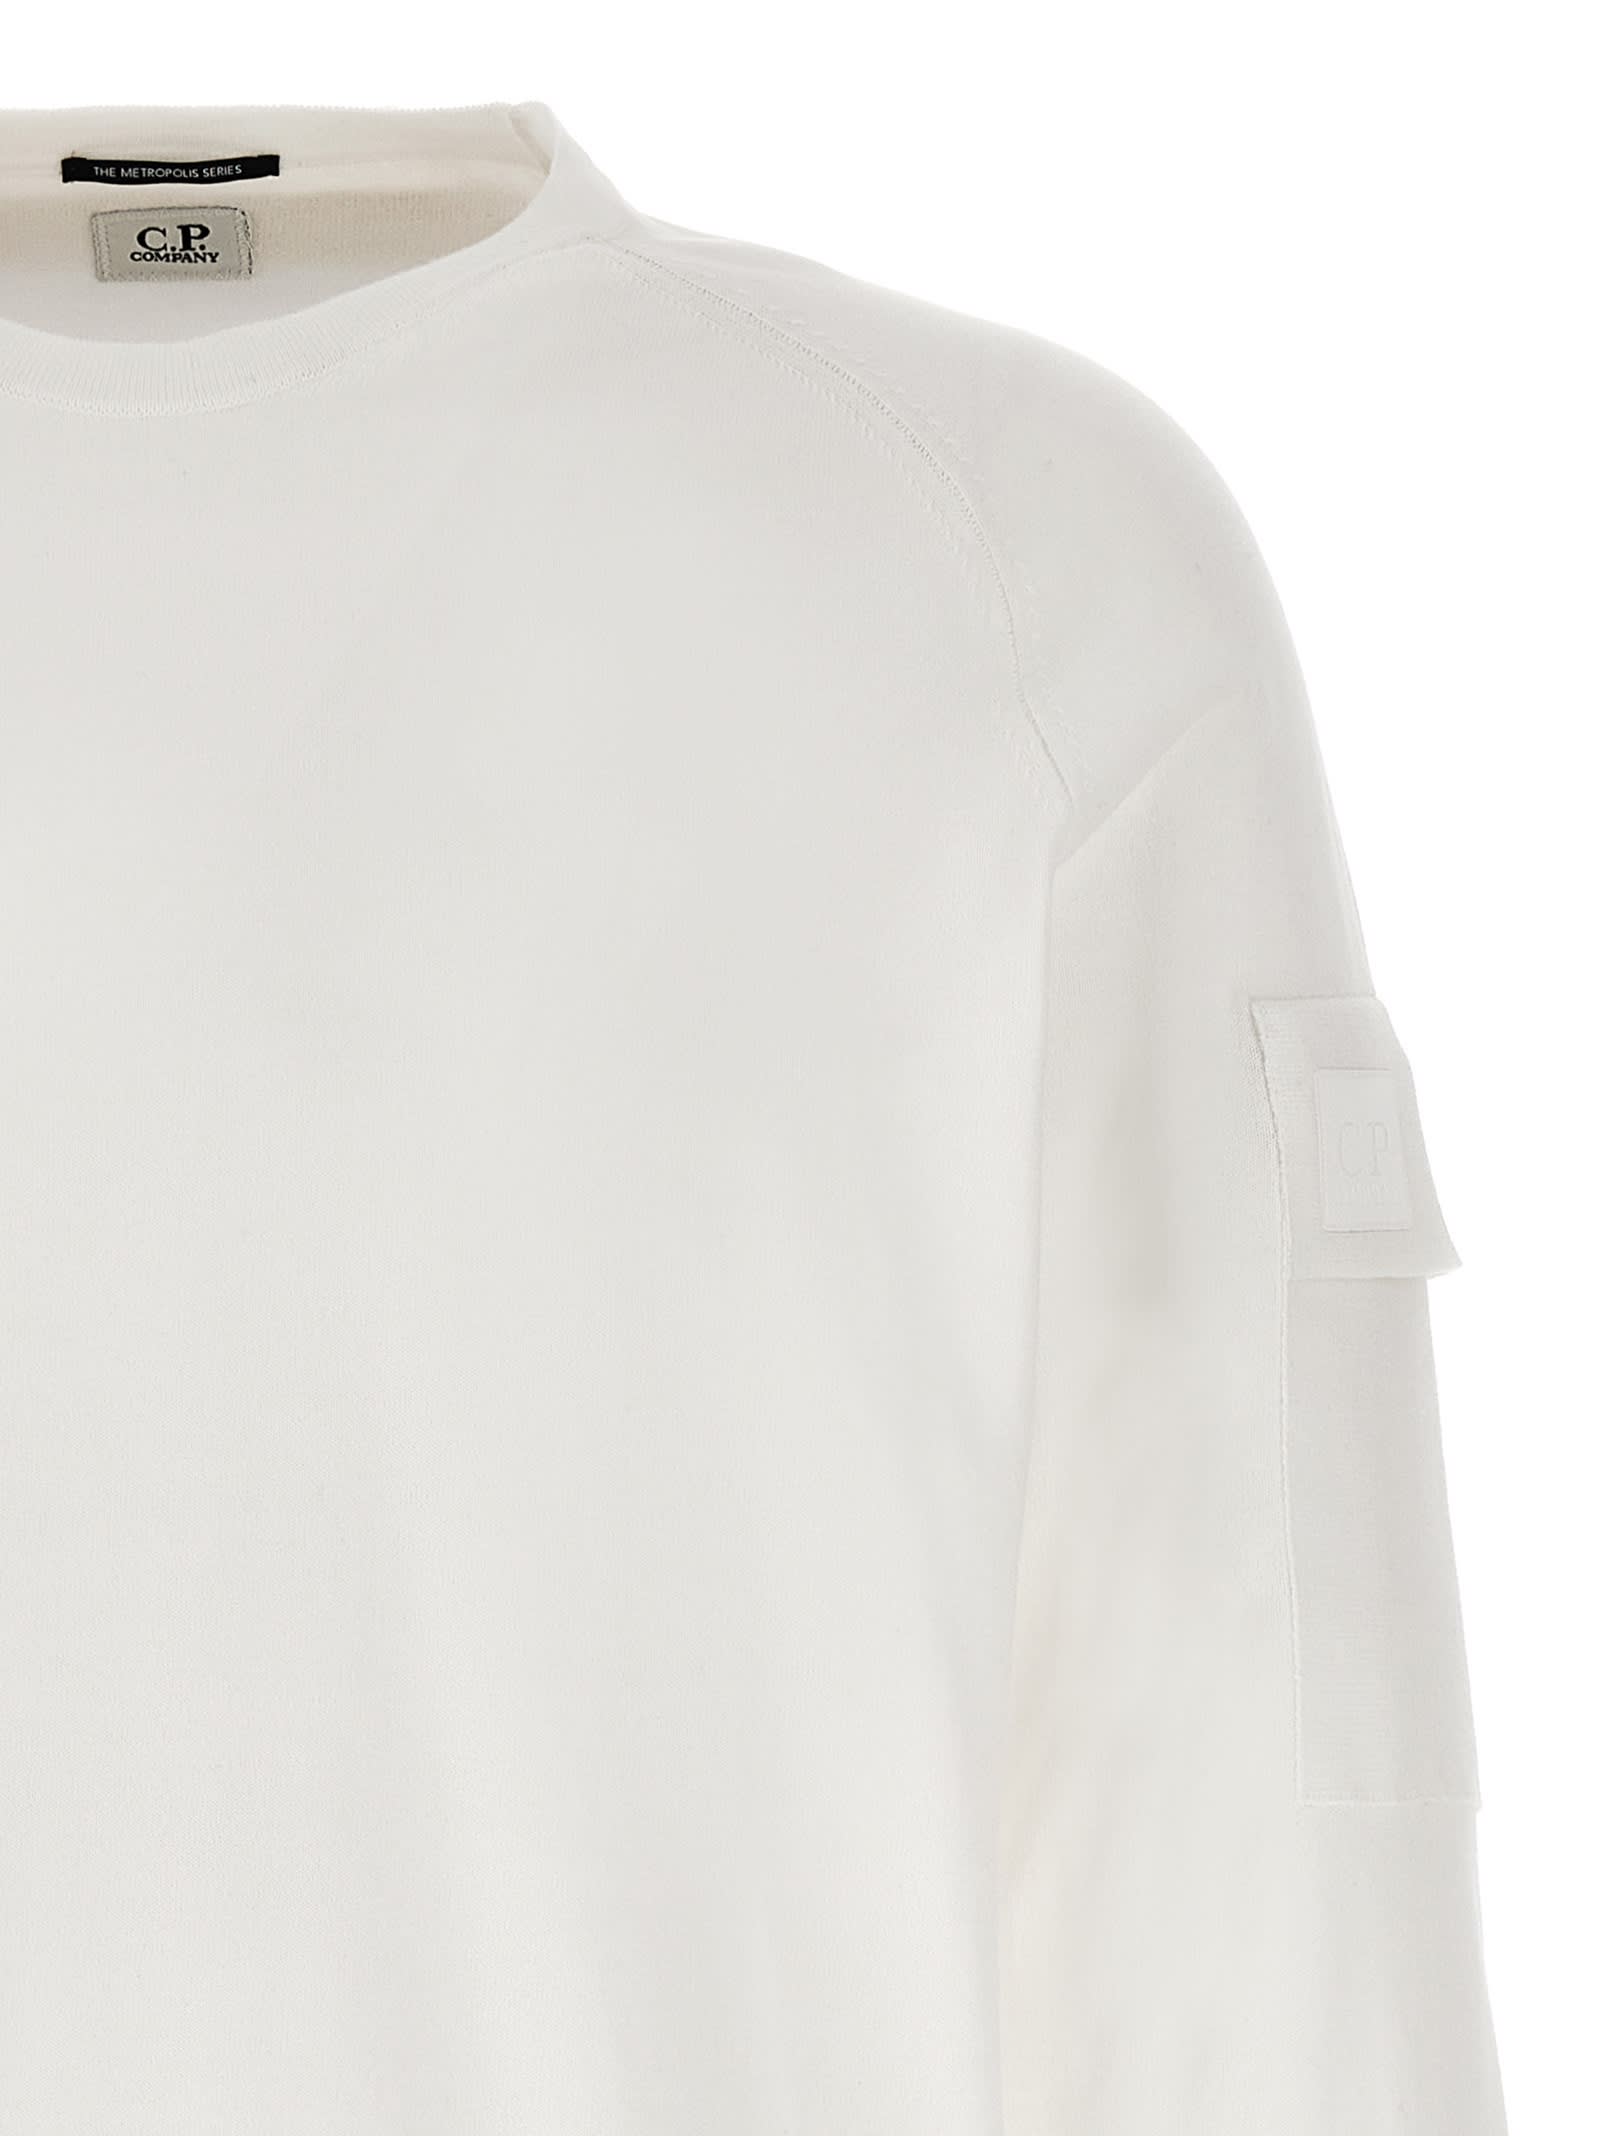 Shop C.p. Company The Metropolis Series Sweater Sweater In White